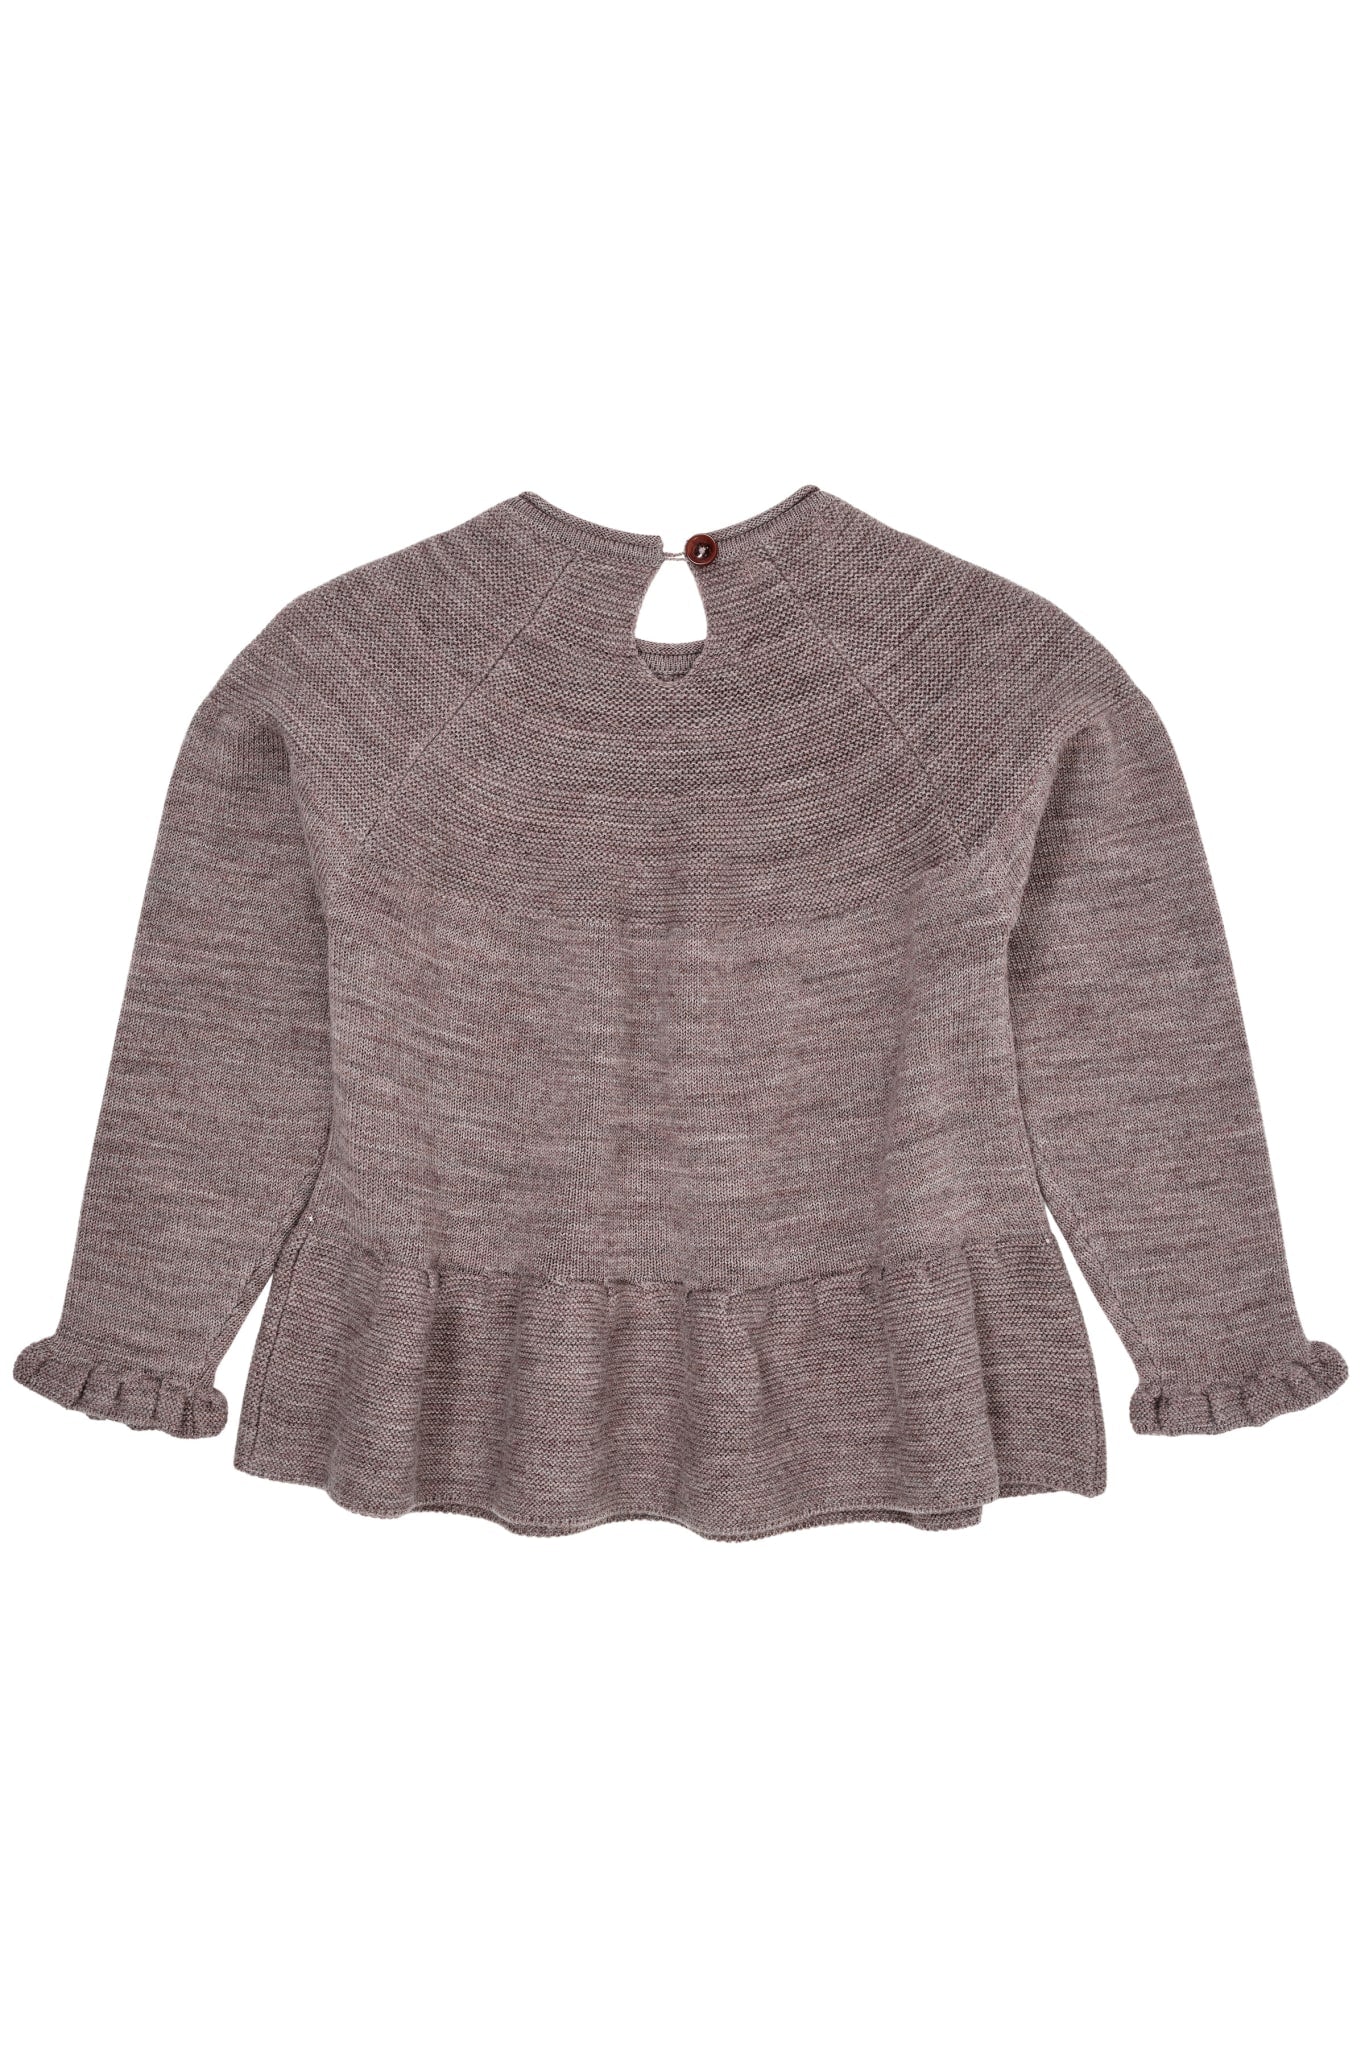 MERINO KNIT BLOUSE WITH FRILL - NATURAL MELANGE